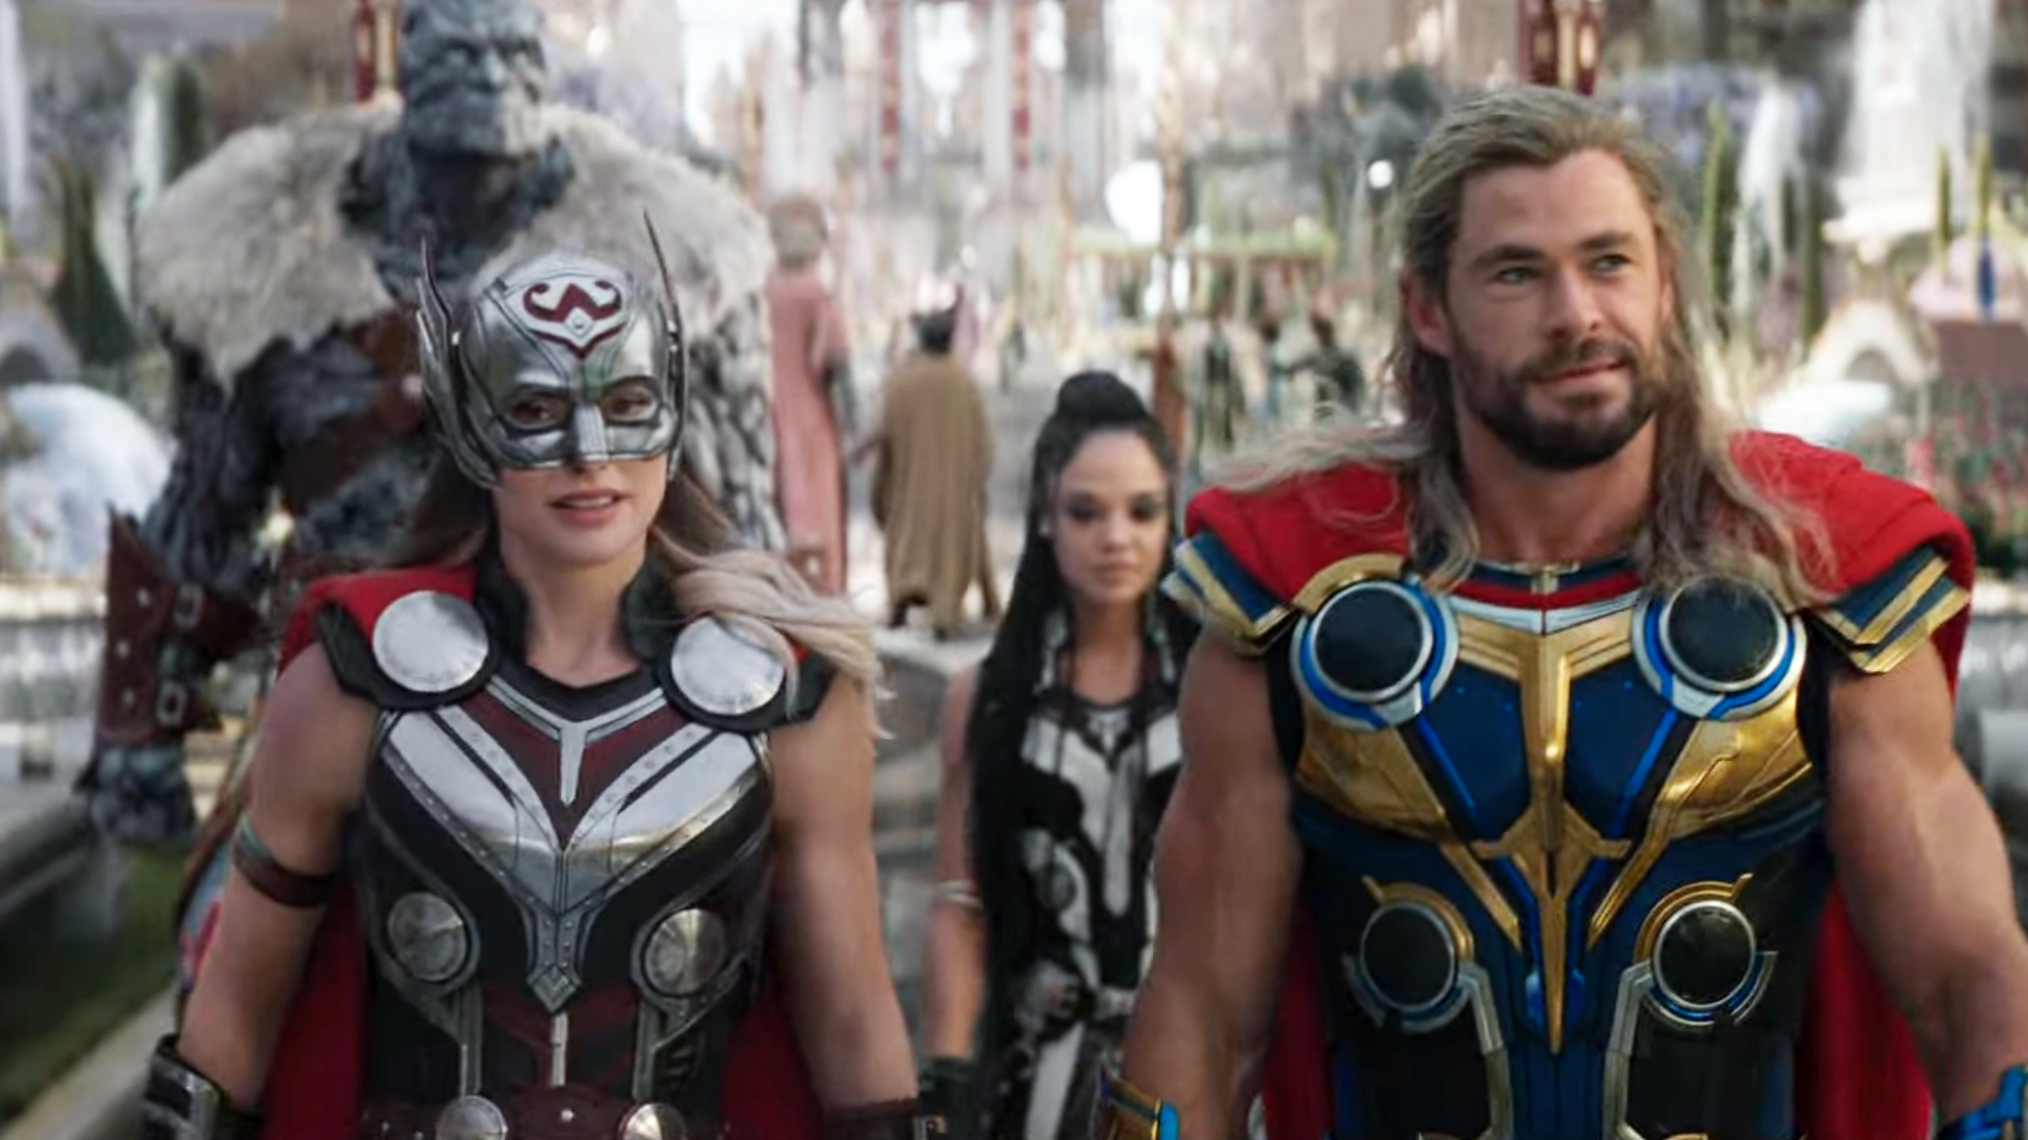 Thor: Love and Thunder, Natalie Portman as Jane Foster (left), Chris Hemsworth as Thor (right) and Tessa Thompson as Valkyrie and Korg in the background